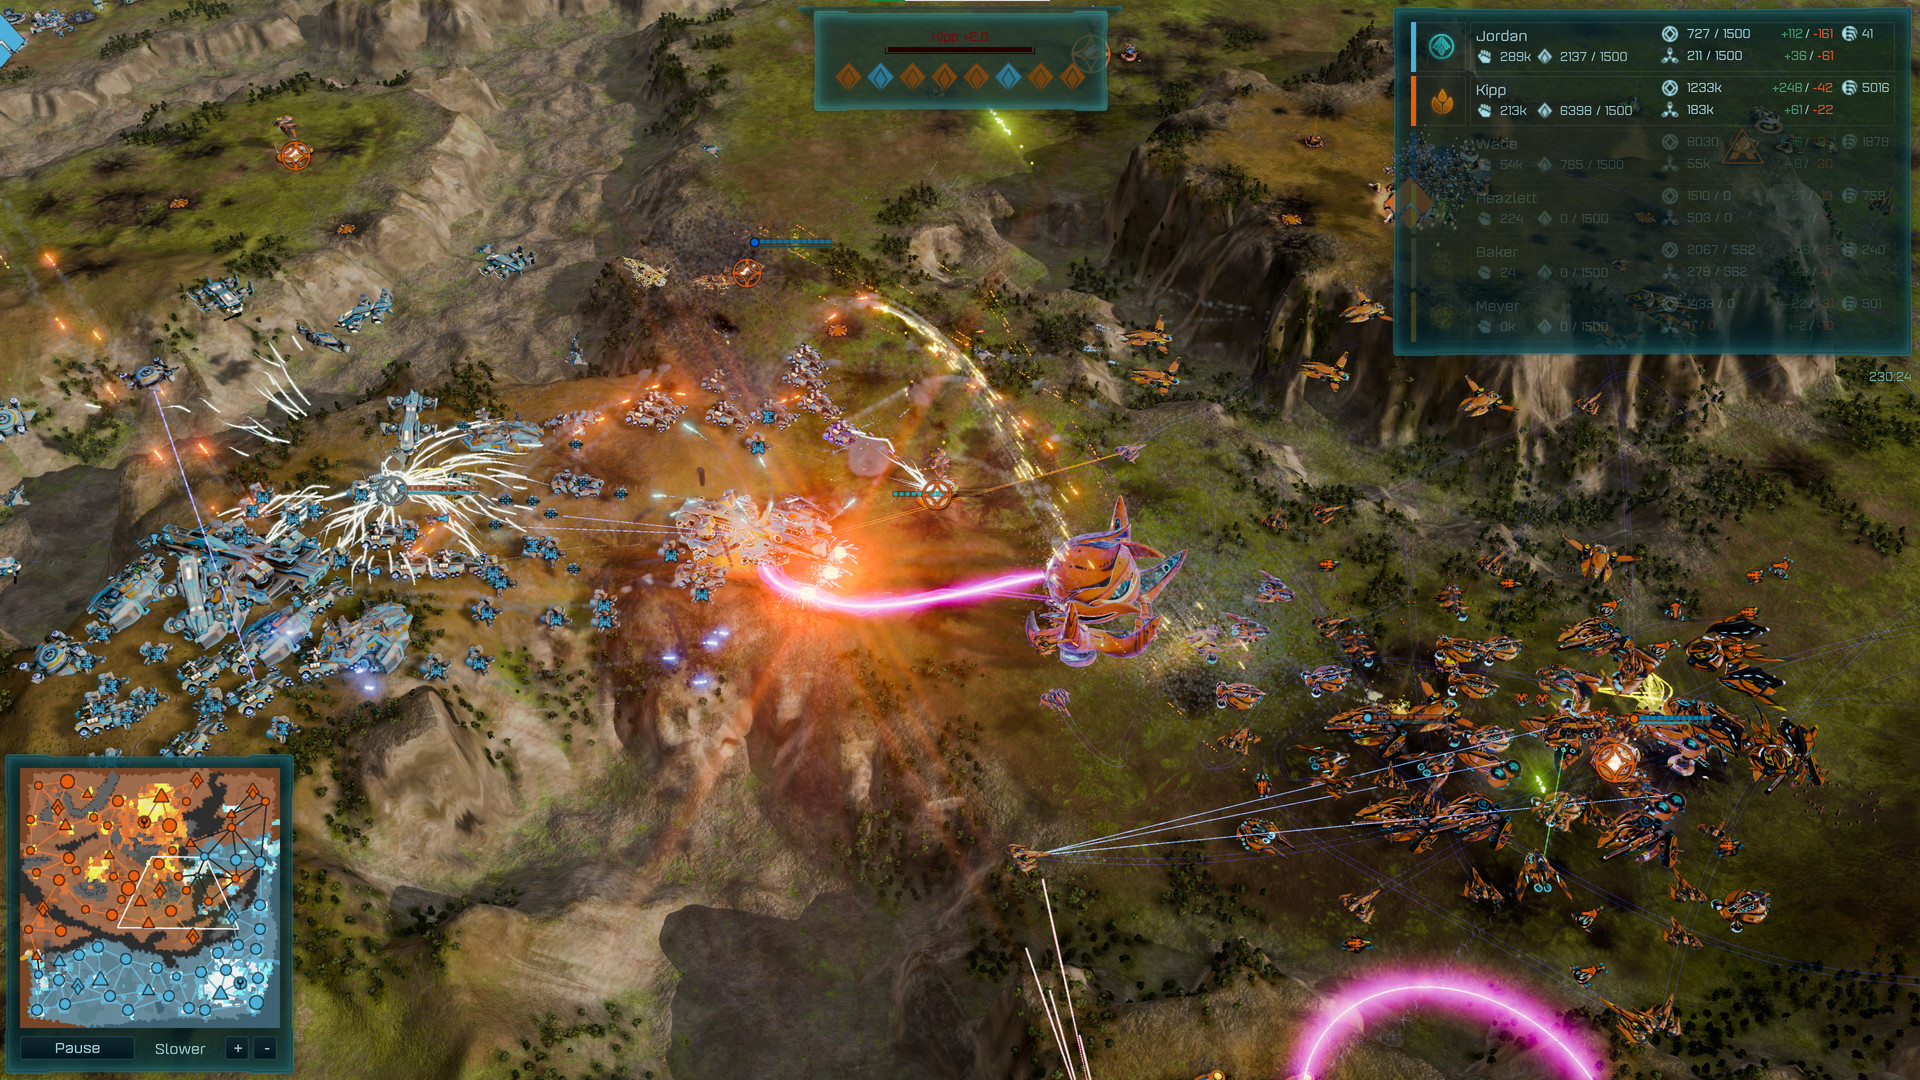 [$ 2.81] Ashes of the Singularity: Escalation - Core Worlds DLC Steam CD Key